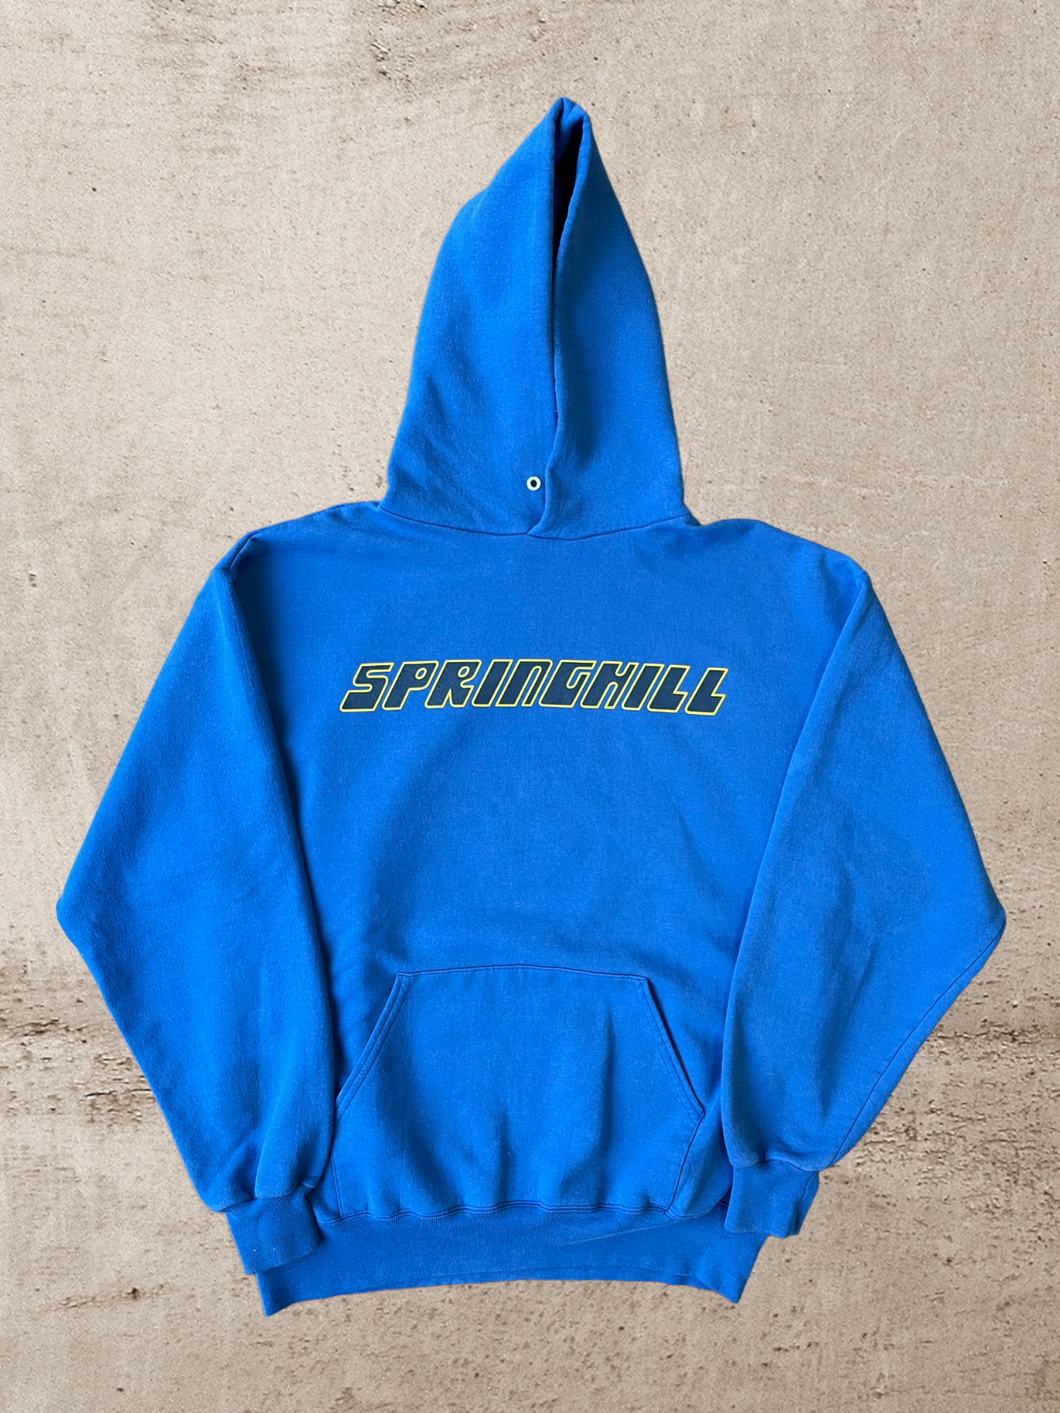 90s Springhill Spellout Sweatshirt - Large